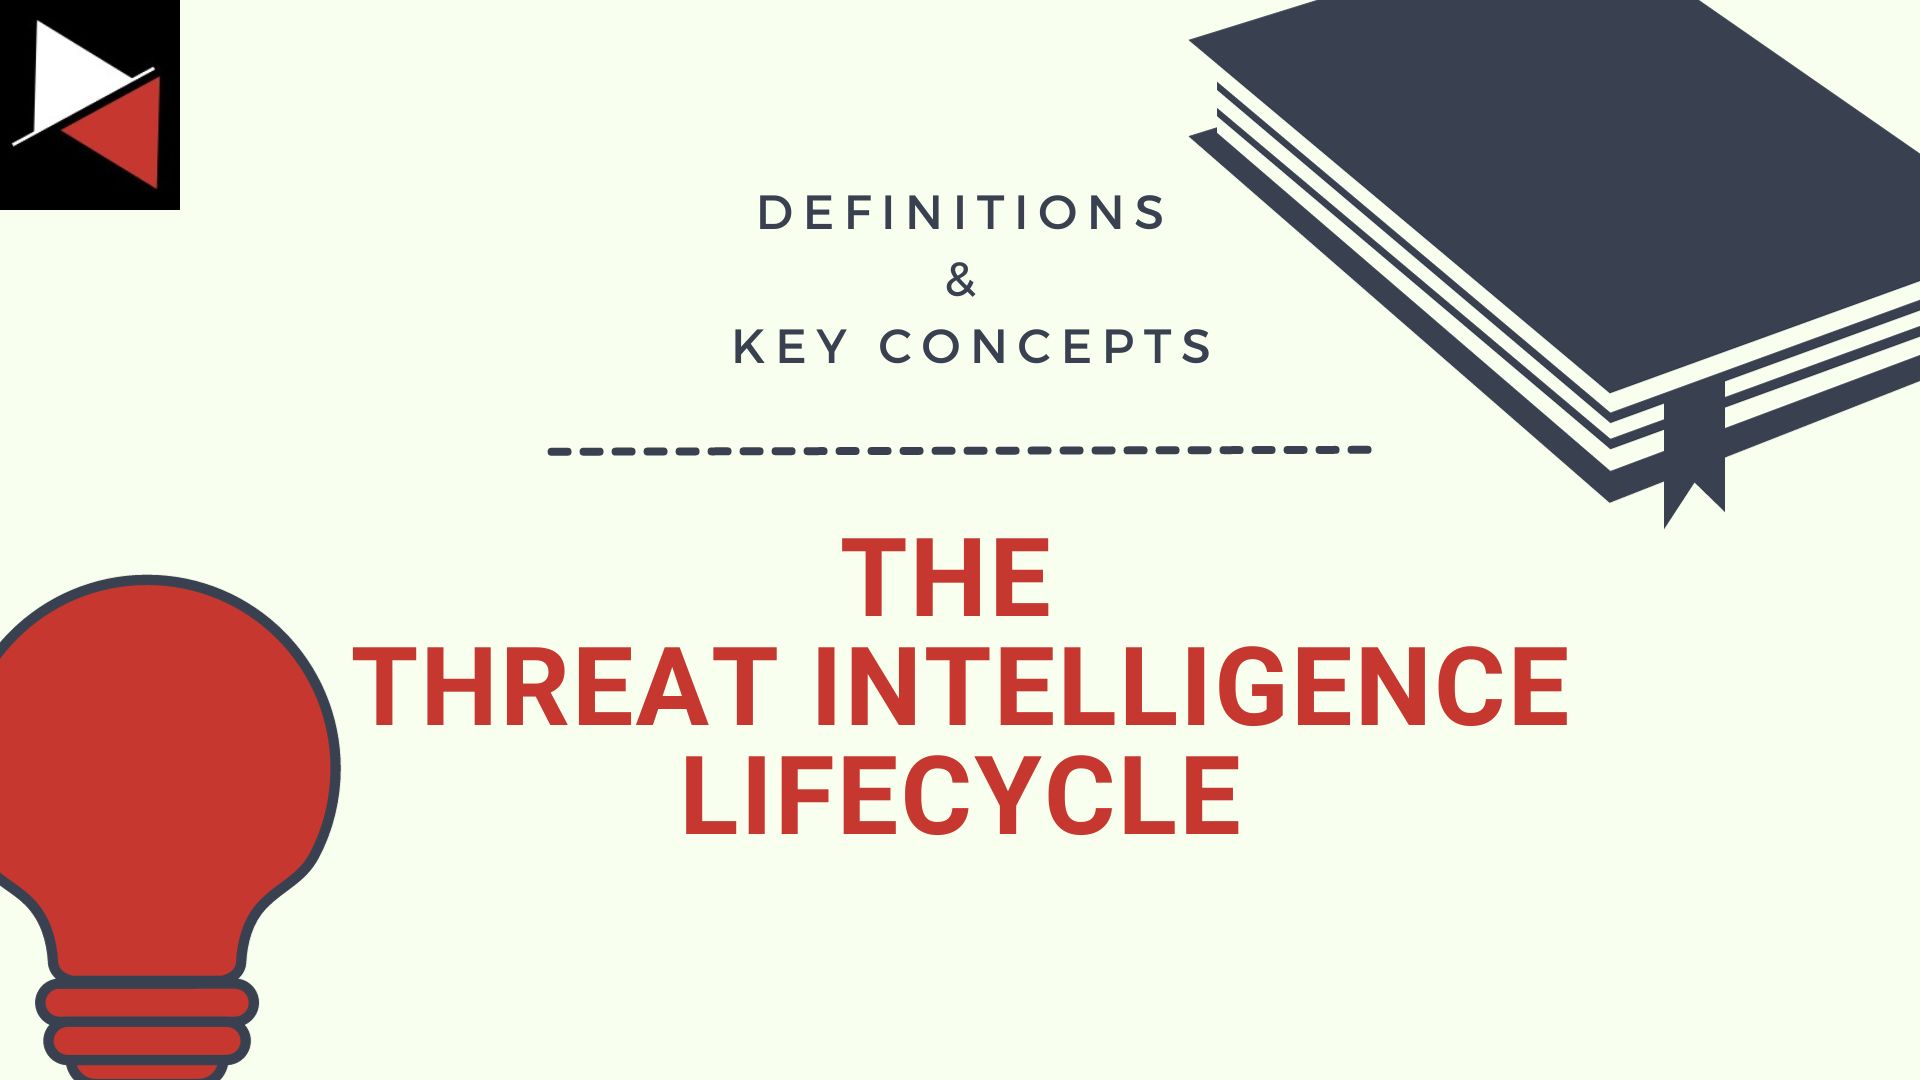 The Cyber Threat Intelligence Lifecycle: A Fundamental Model